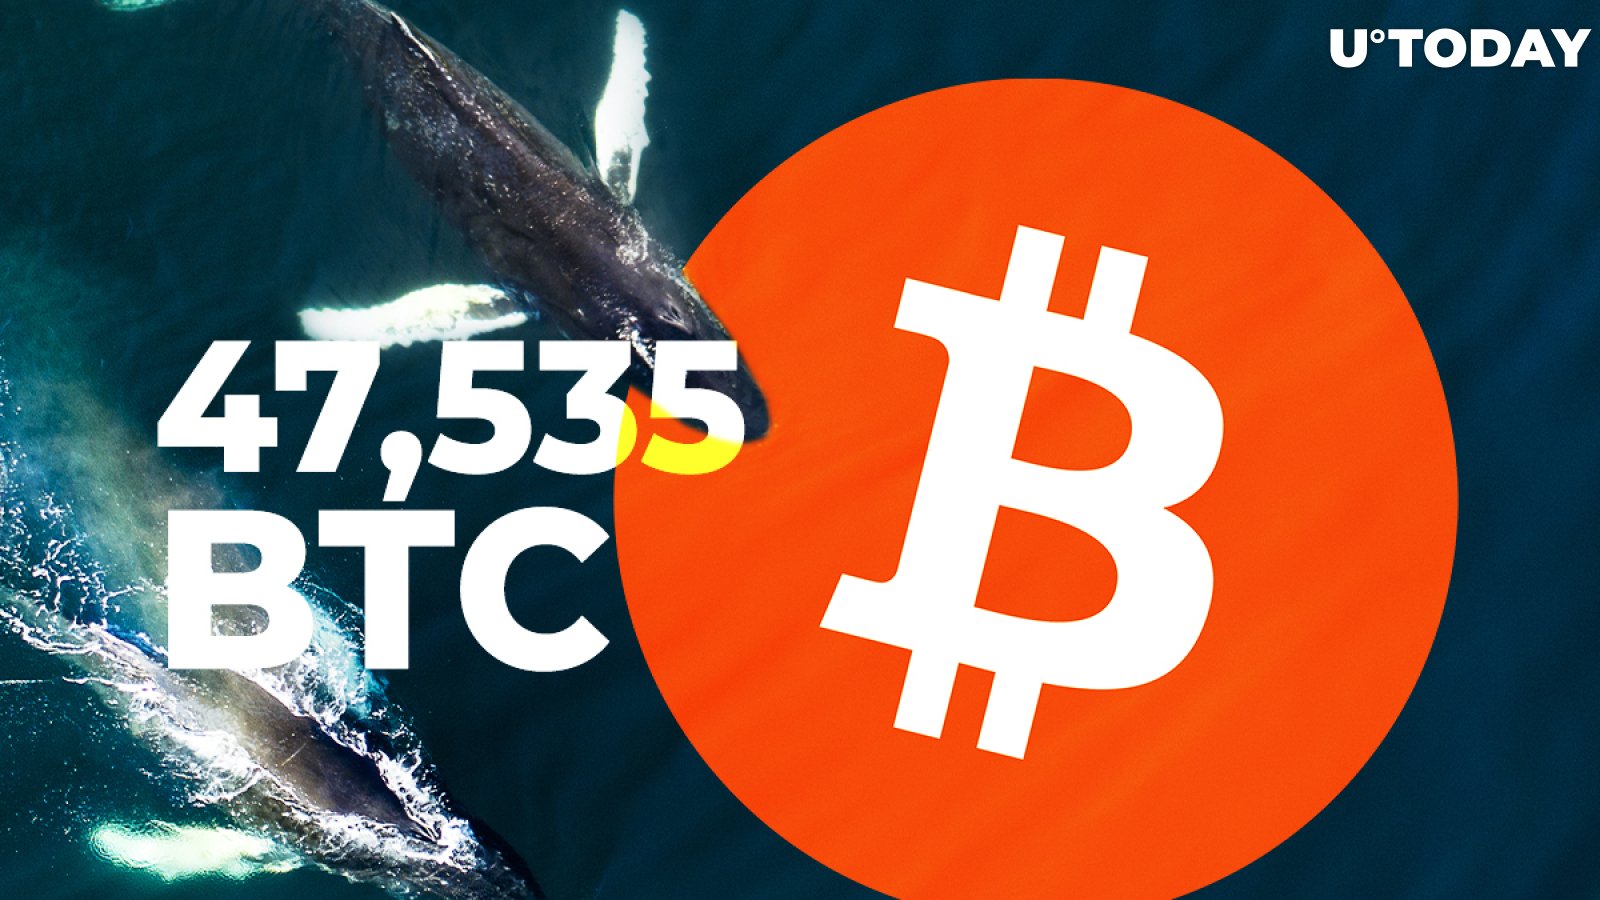 Bitcoin Whale Transfers Another 47,535 BTC - Second Day in a Row